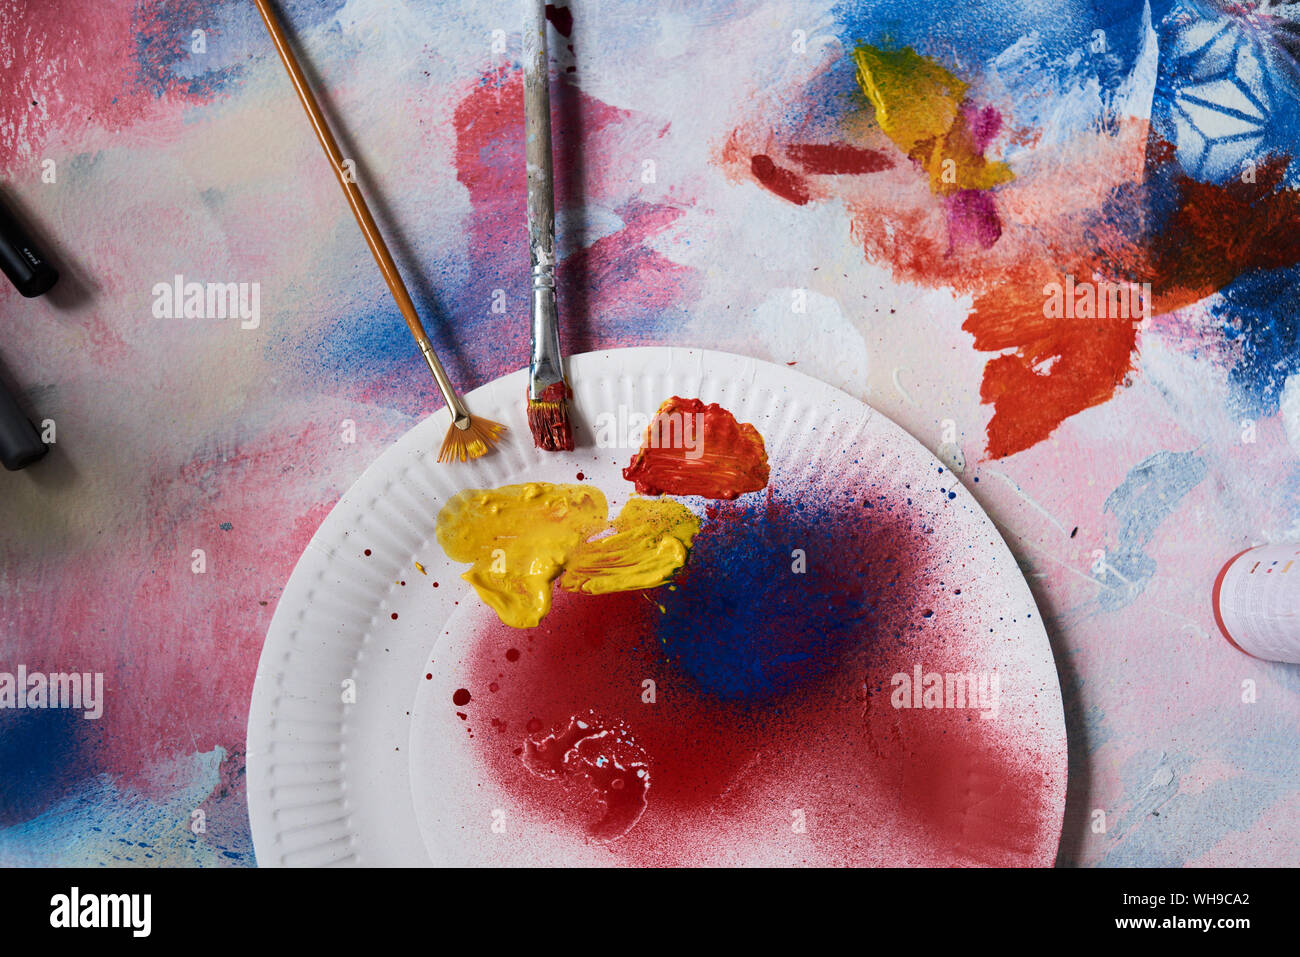 Paint palette on plate and glass containing brushes Stock Photo - Alamy